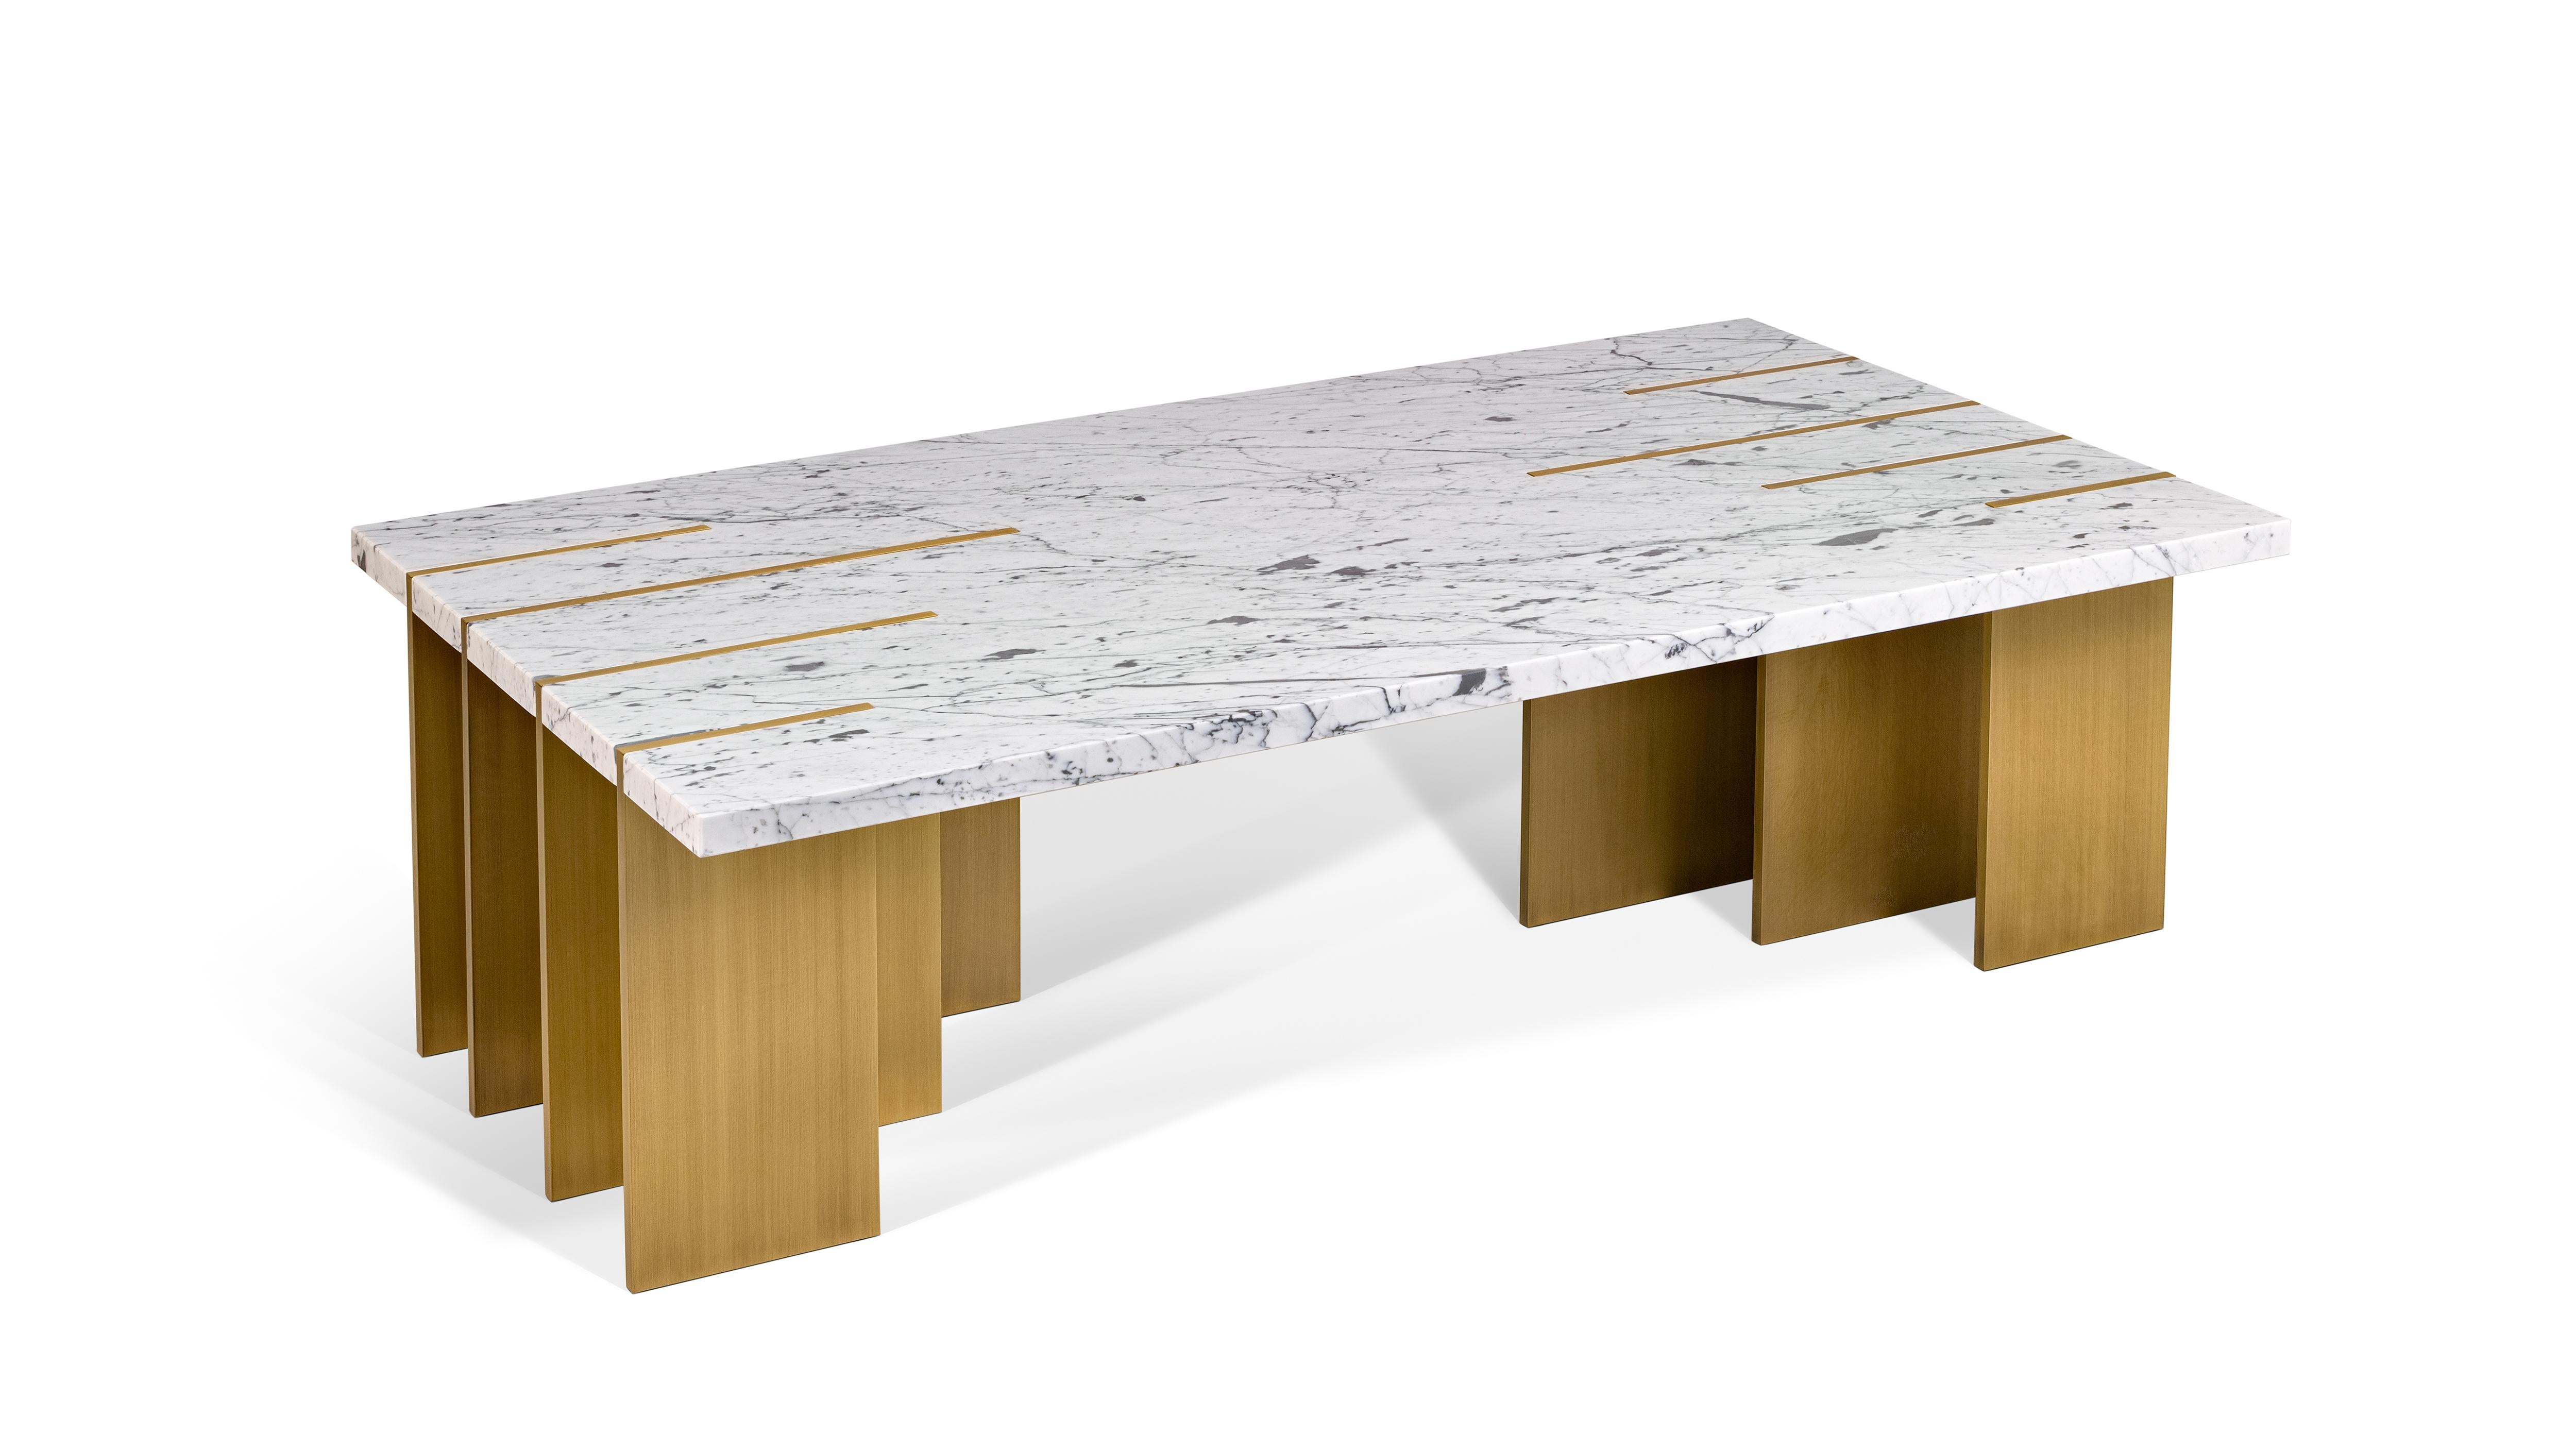 Pianist Carrara Marble Coffee Table by InsidherLand
Dimensions: D 75 x W 130 x H 38 cm.
Materials: Carrara marble, oxidized brushed brass.
115 kg.
Other marbles are available.

The Pianist coffee table, doesn't represent the piano but the hands of